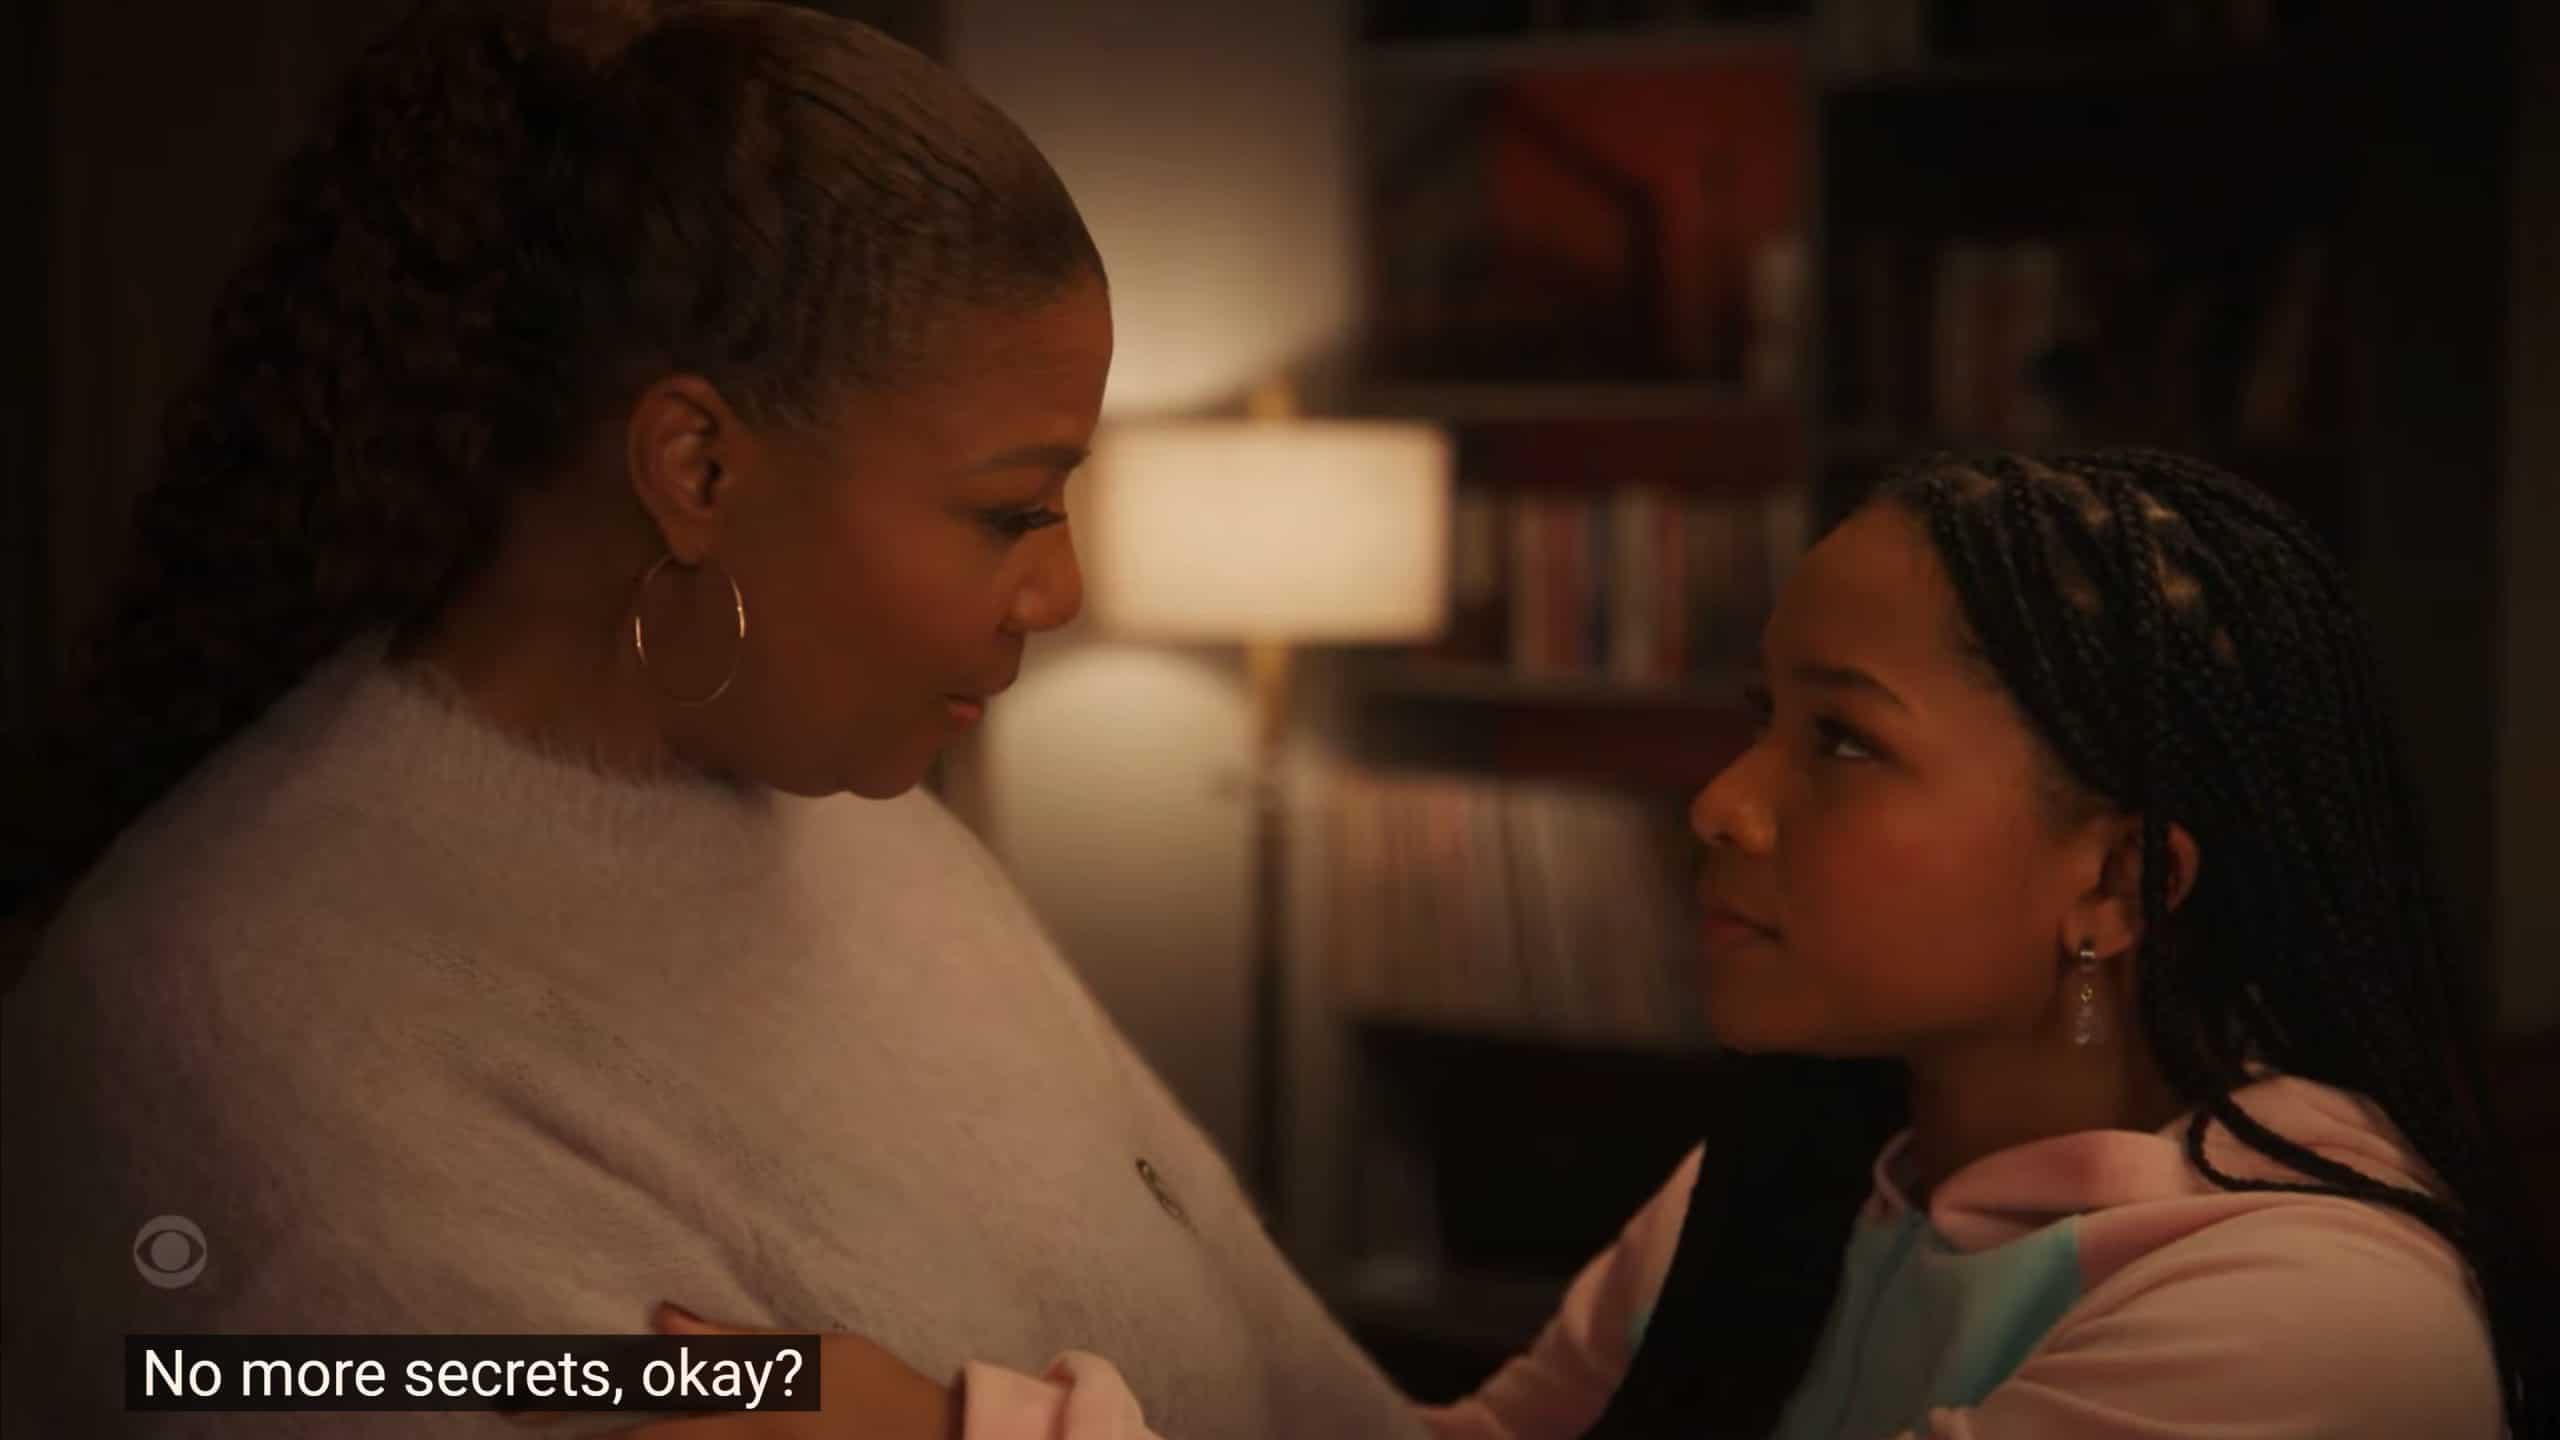 Queen Latifah as Robyn and Laya DeLeon Hayes as Delilah committing to no more secrets